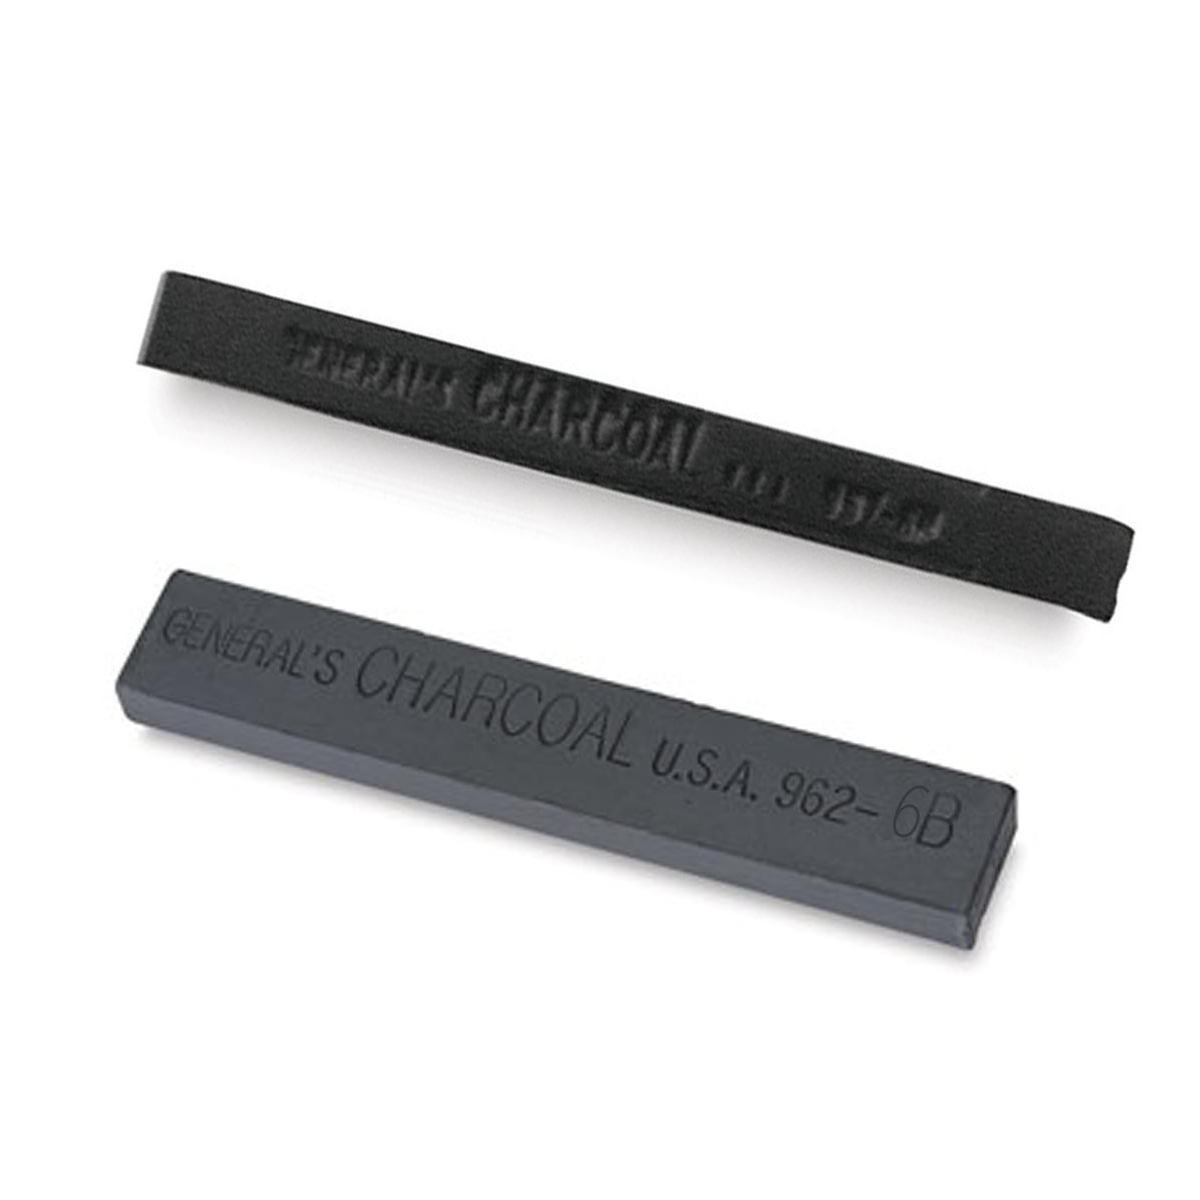 General's Compressed Charcoal Single Sticks